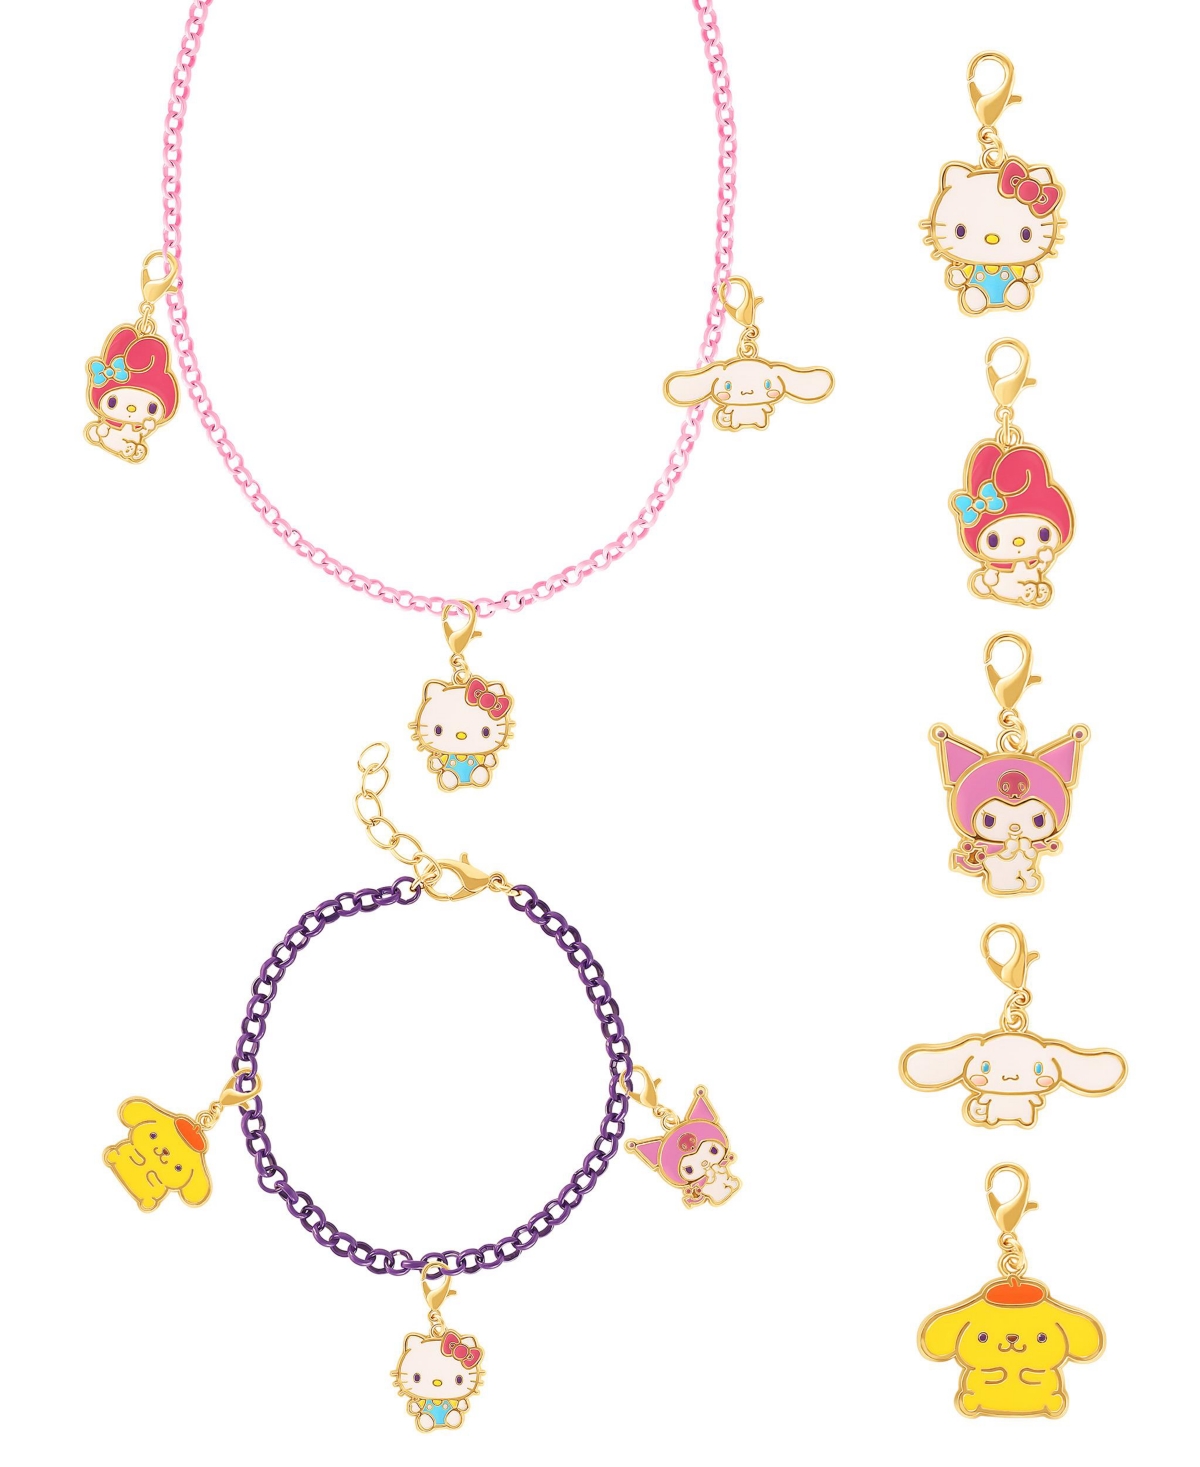 and Friends Fashion Interchangeable Charms with Necklace and Bracelet Chain Set - Pink, yellow, white